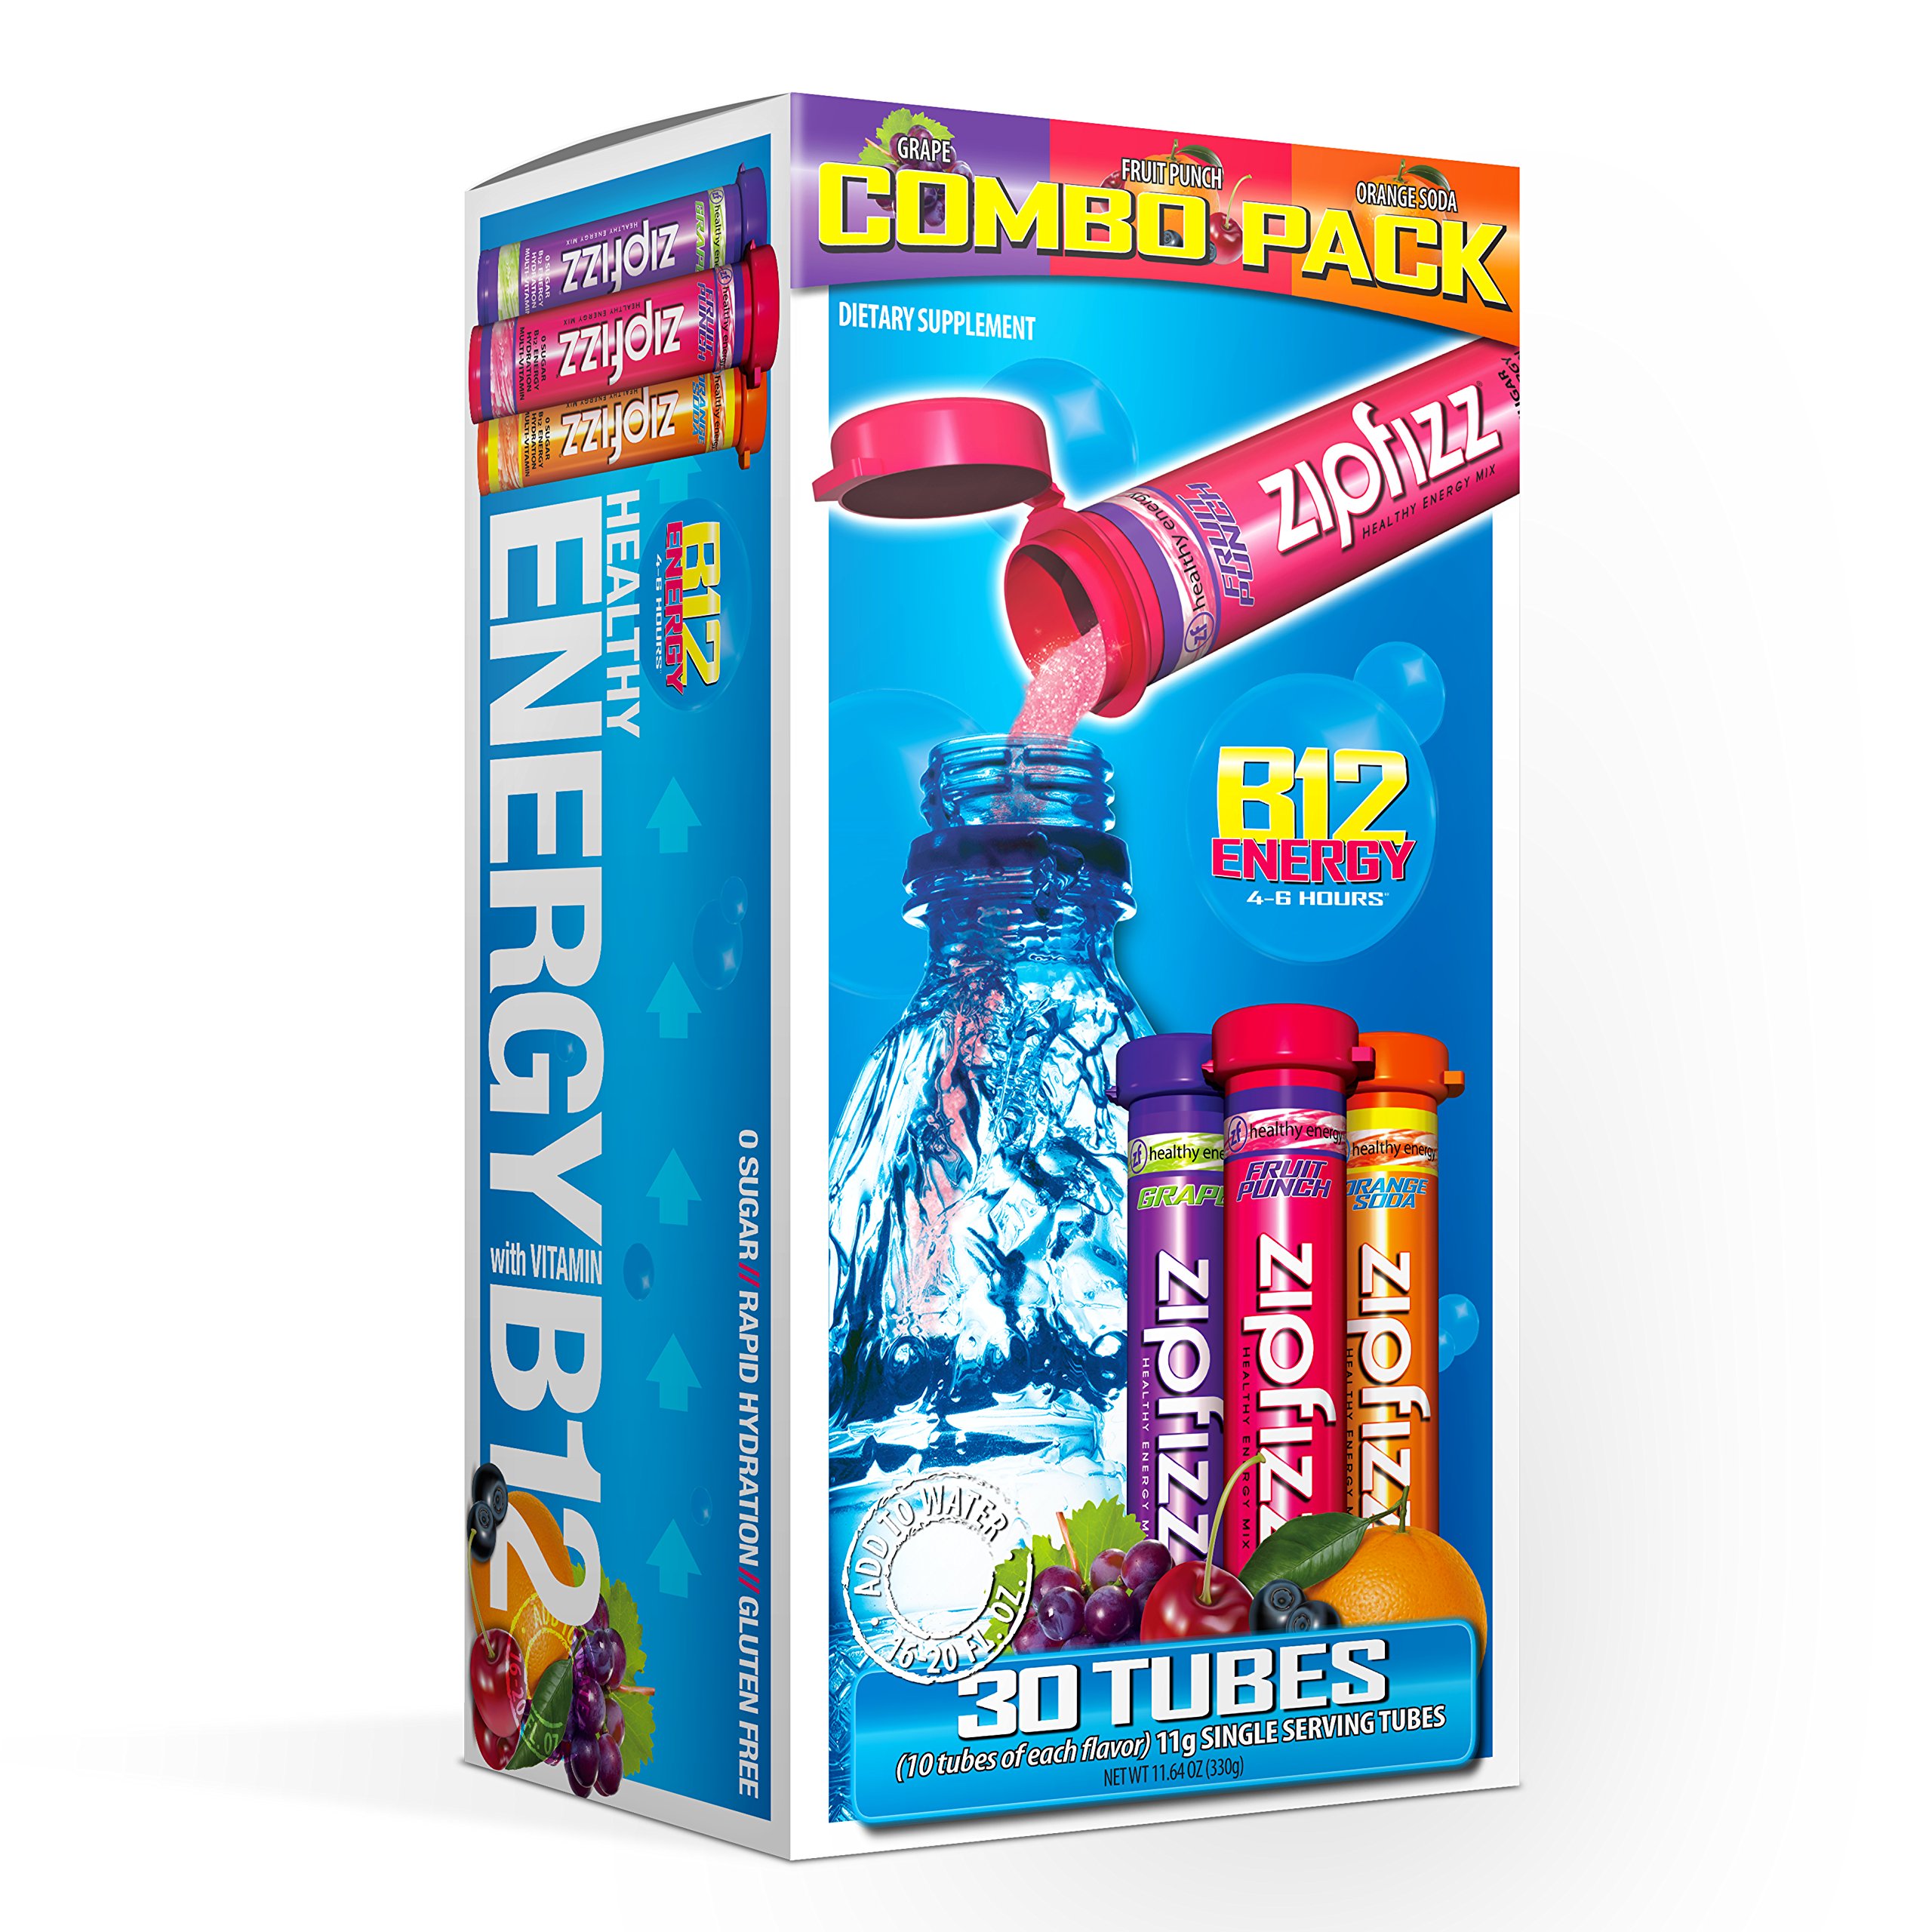 Zipfizz Variety Pack 30 count $20.59 at Amazon